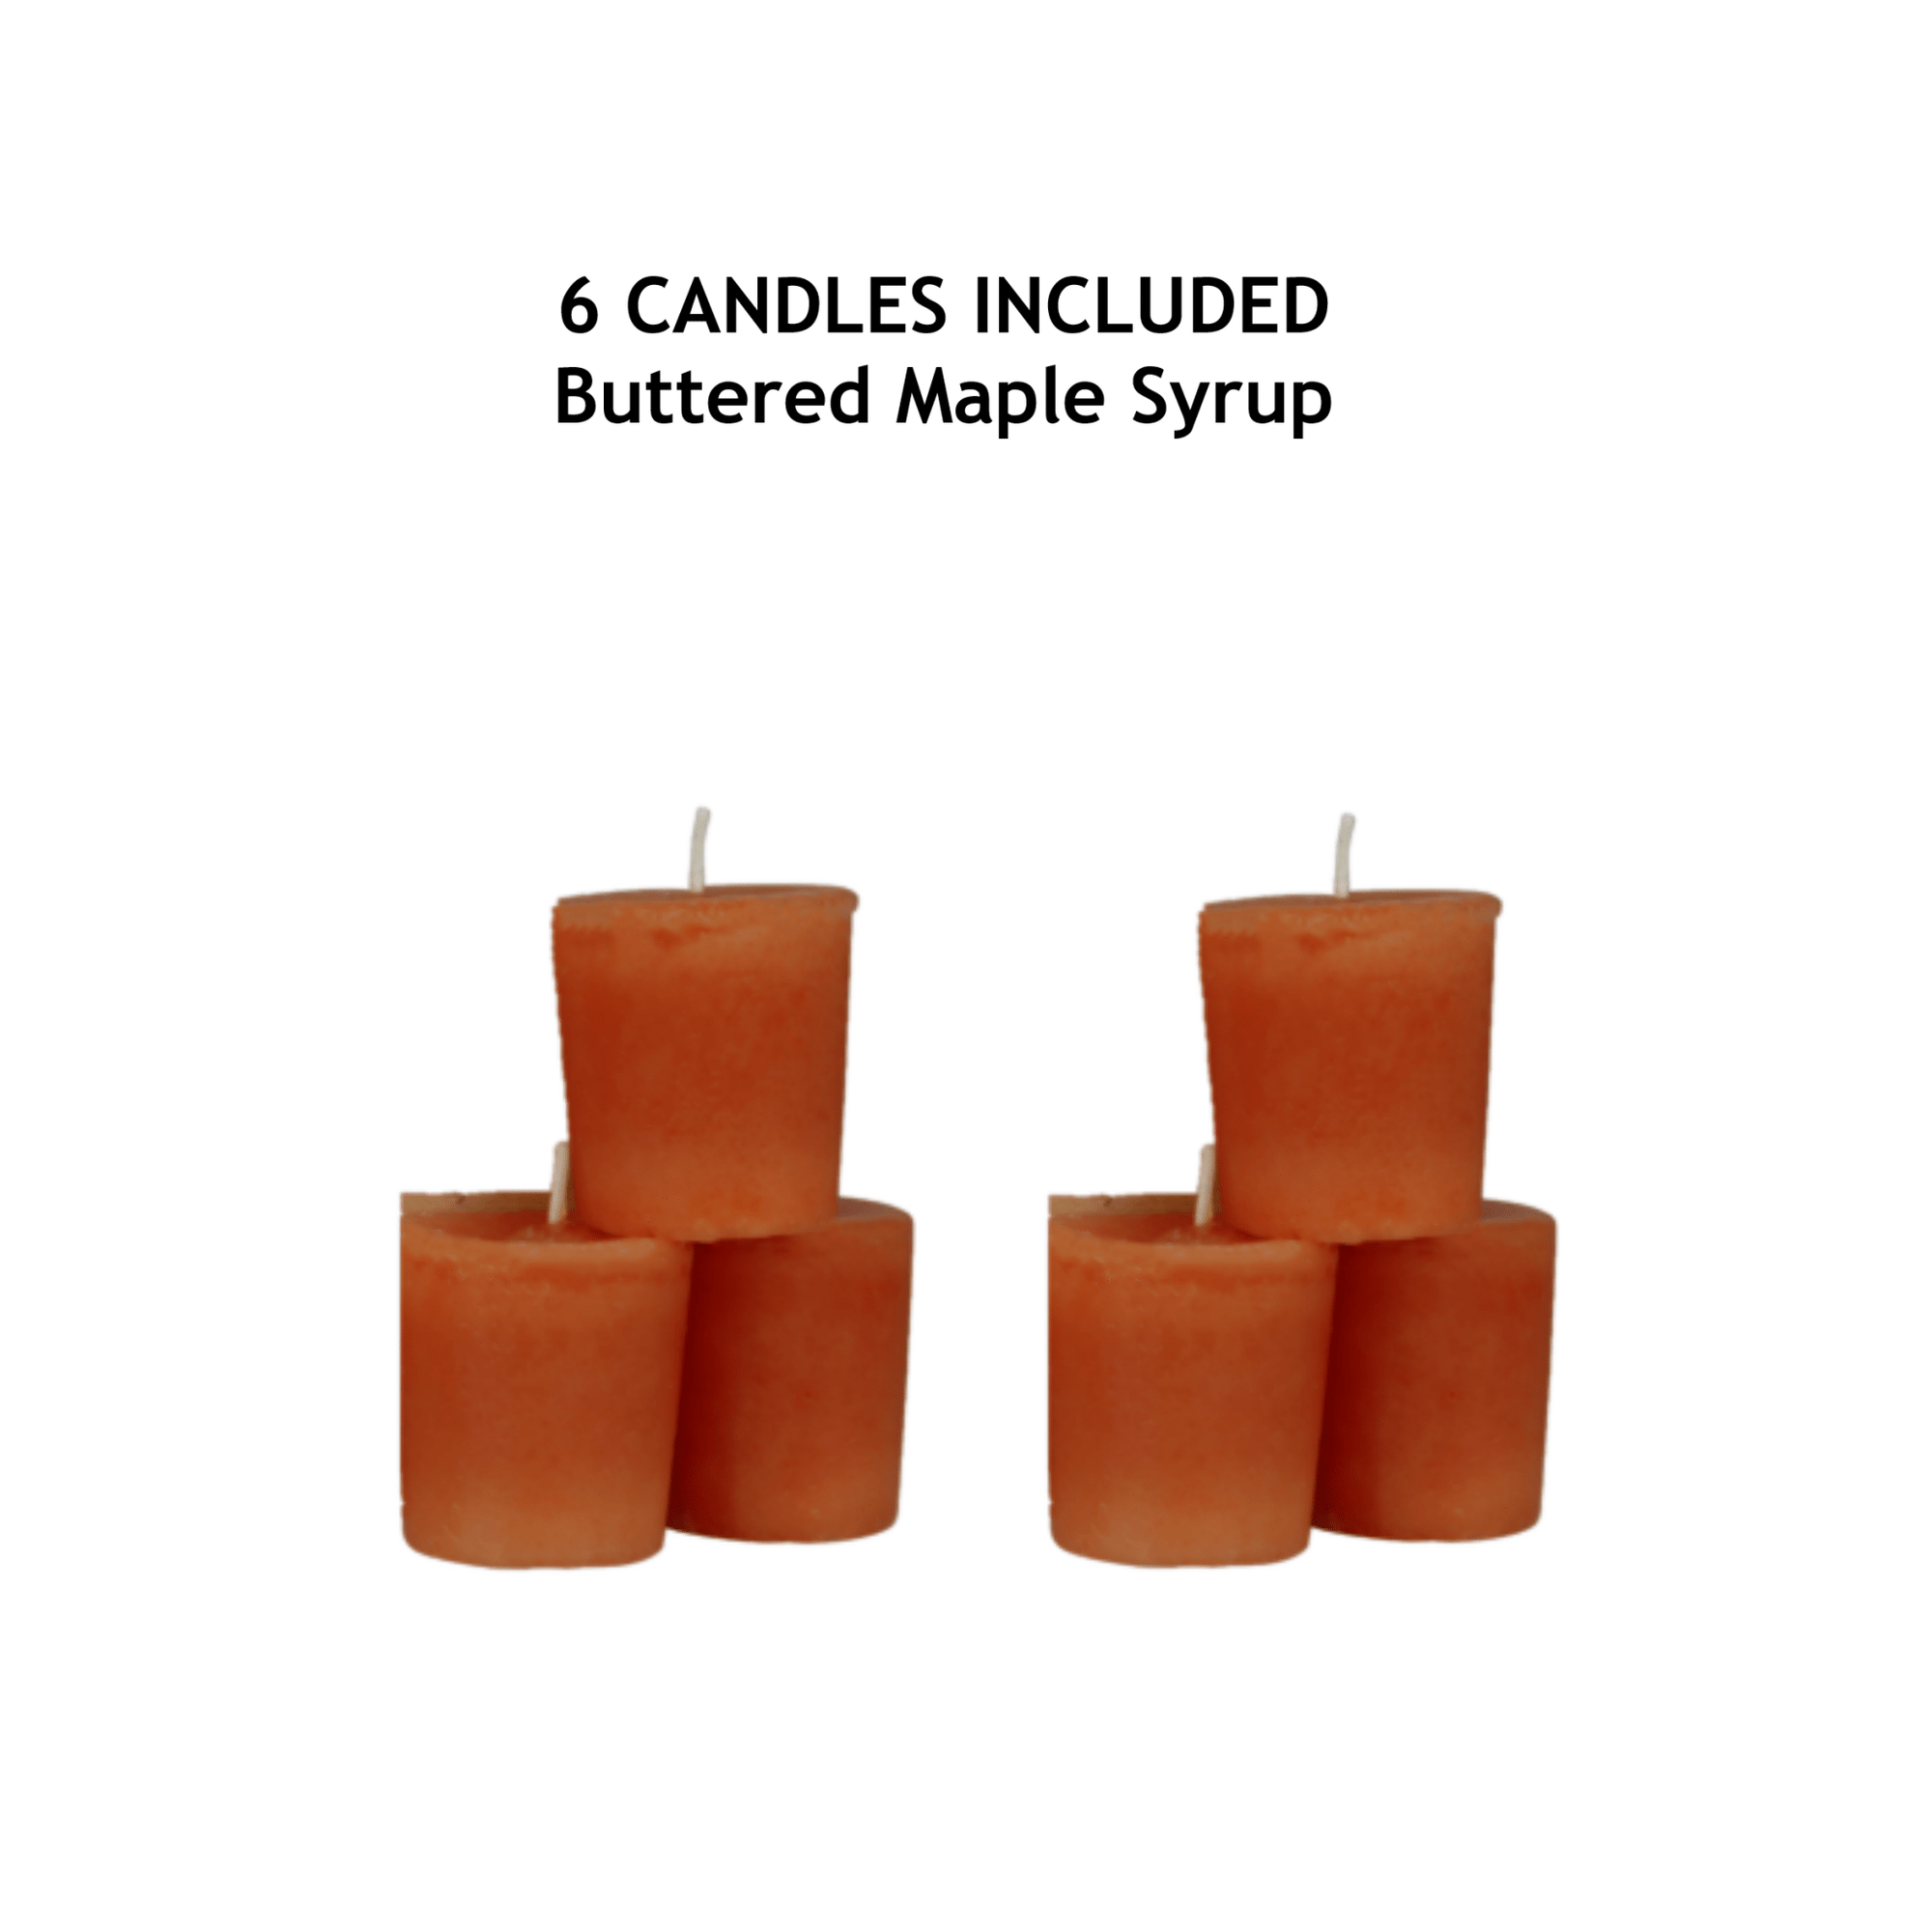 Personalized Cherry Wood Single Votive Candle Holder - 40th Wedding Anniversary - LifeSong Milestones